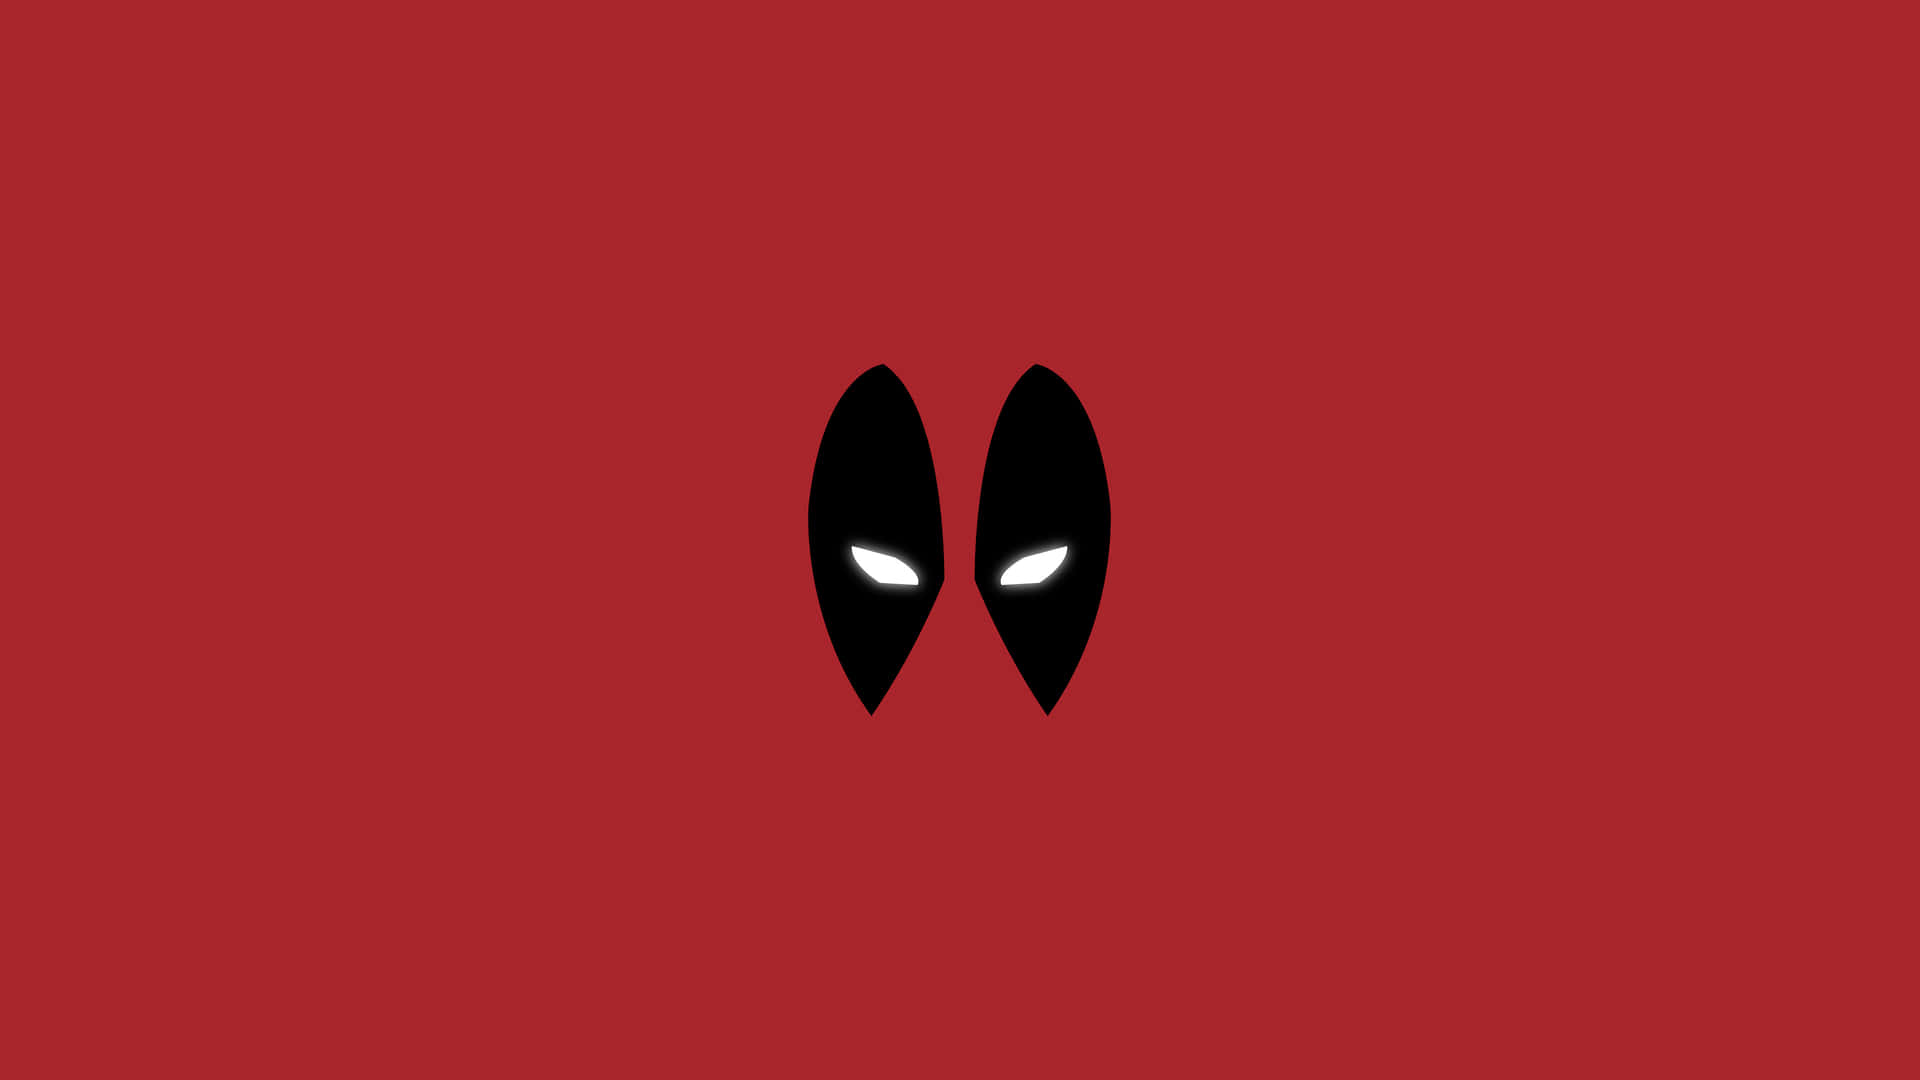 Marvel's Merc with a Mouth, Deadpool Logo Wallpaper